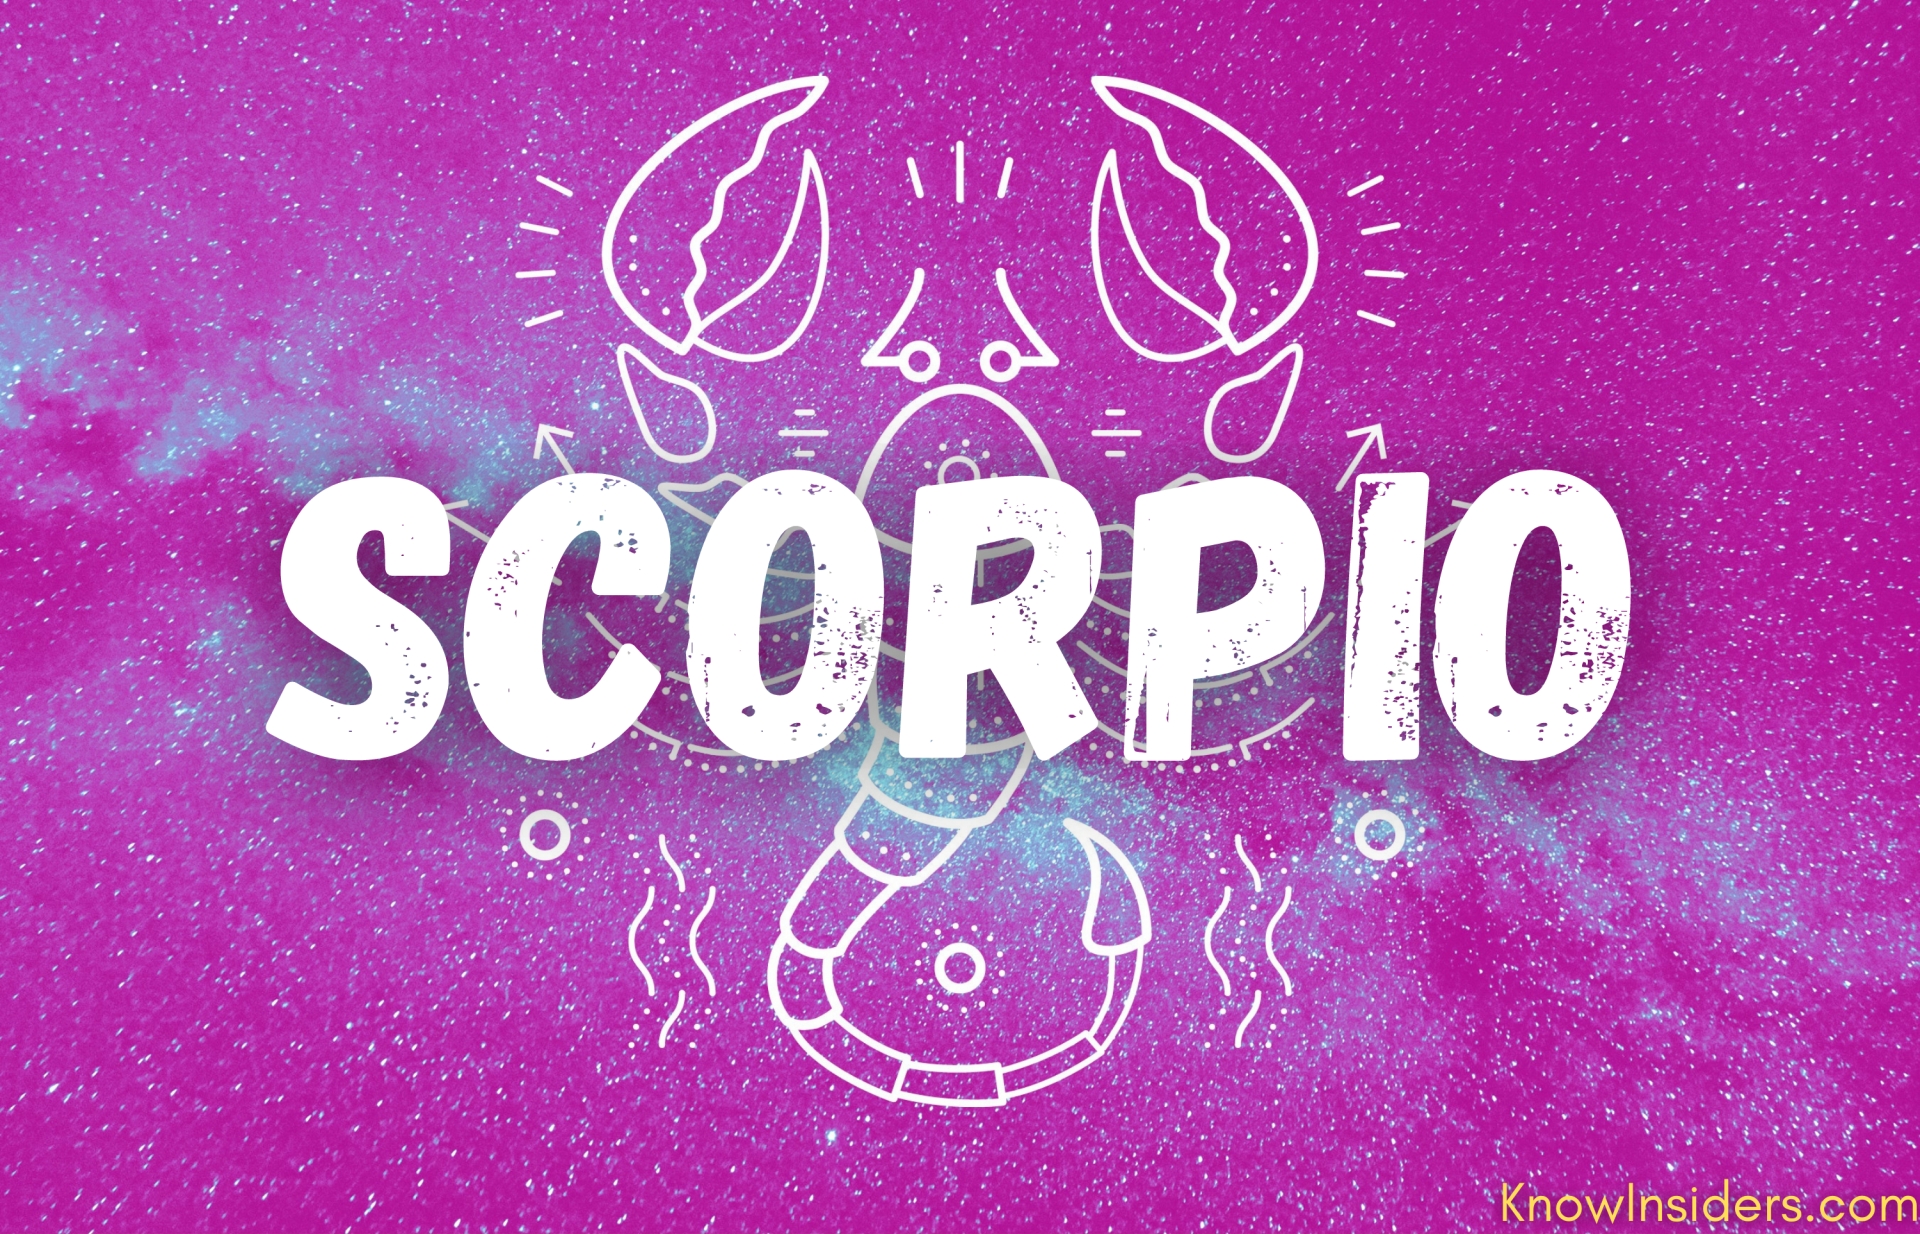 SCORPIO Horoscope September 2021 - Monthly Predictions for Love, Health, Career and Money